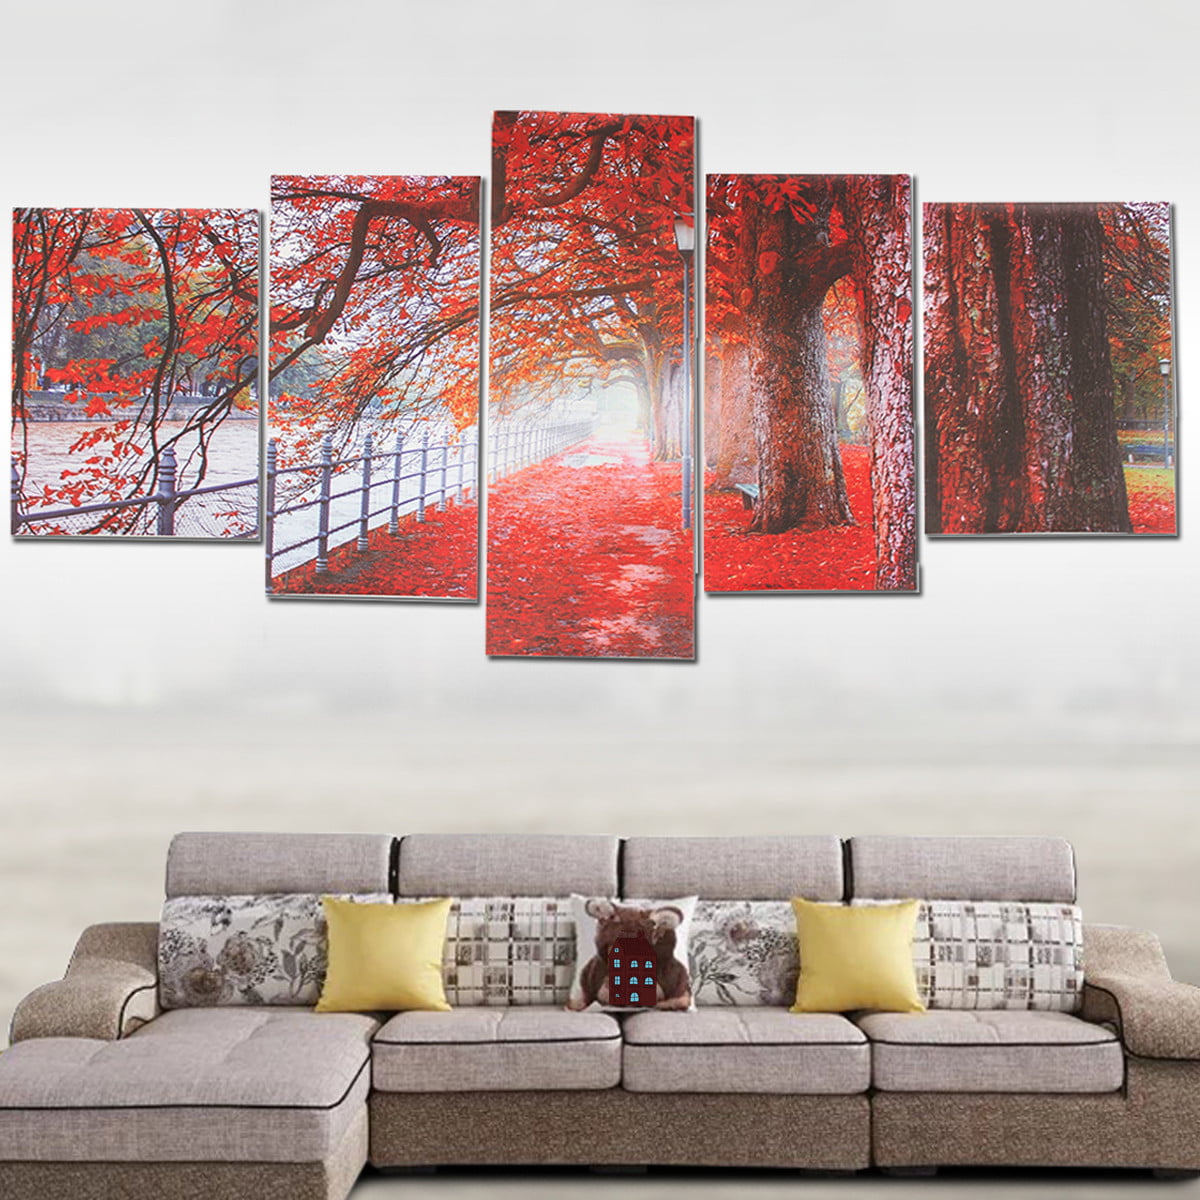 5pcs Unframed Modern Art Oil Painting Print Canvas Picture Home Wall Room Decor 